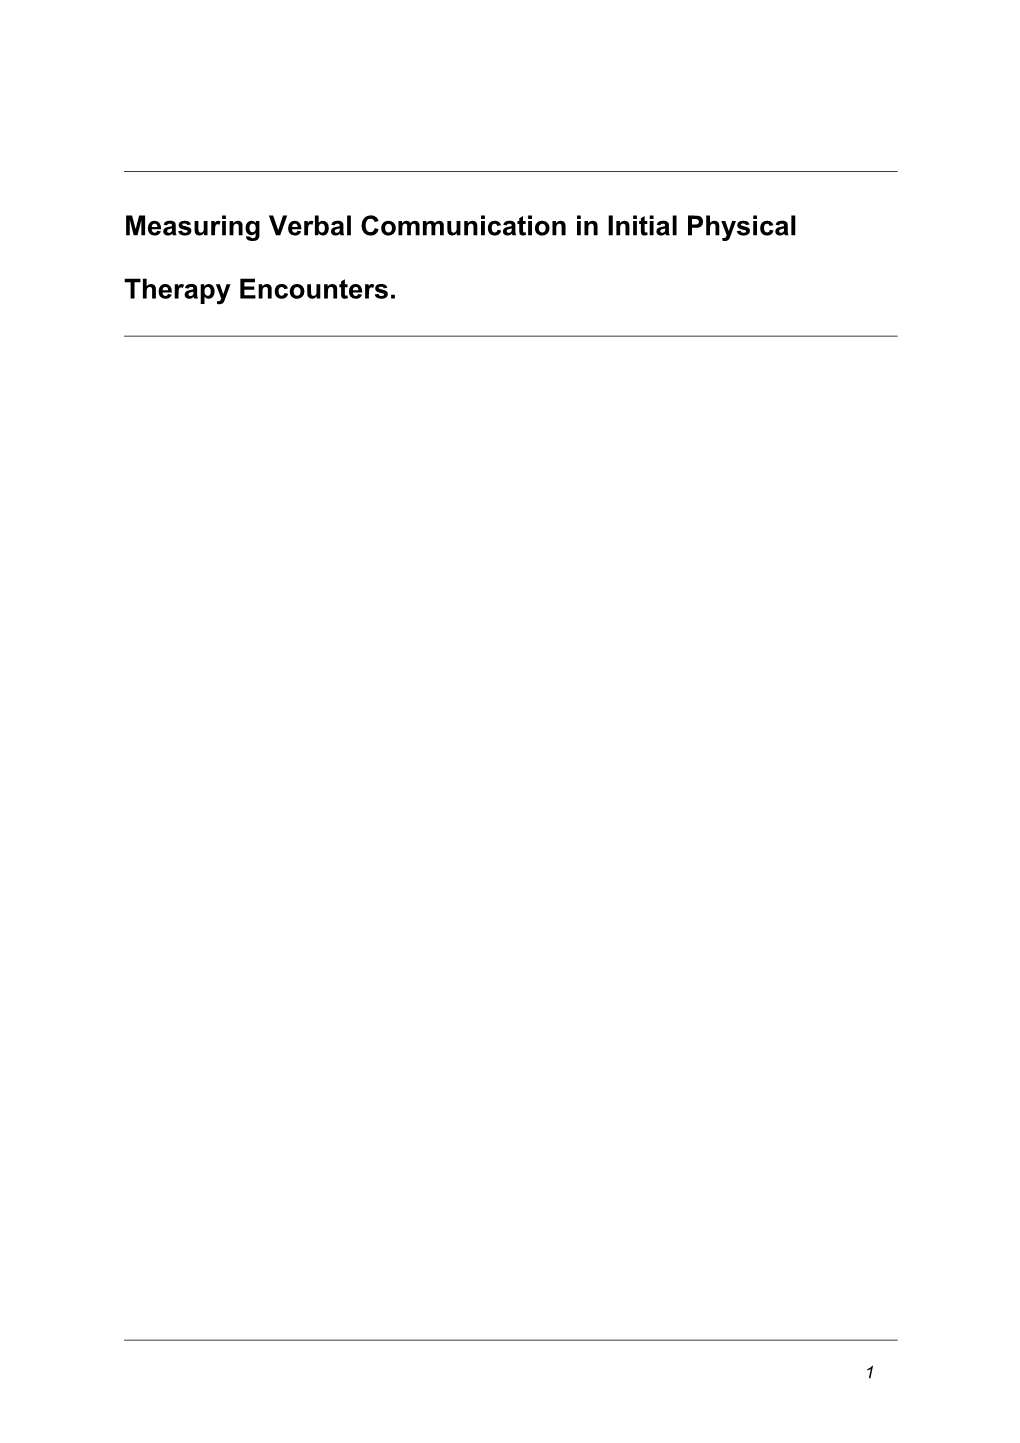 Measuring Verbal Communication in Initial Physical Therapy Encounters